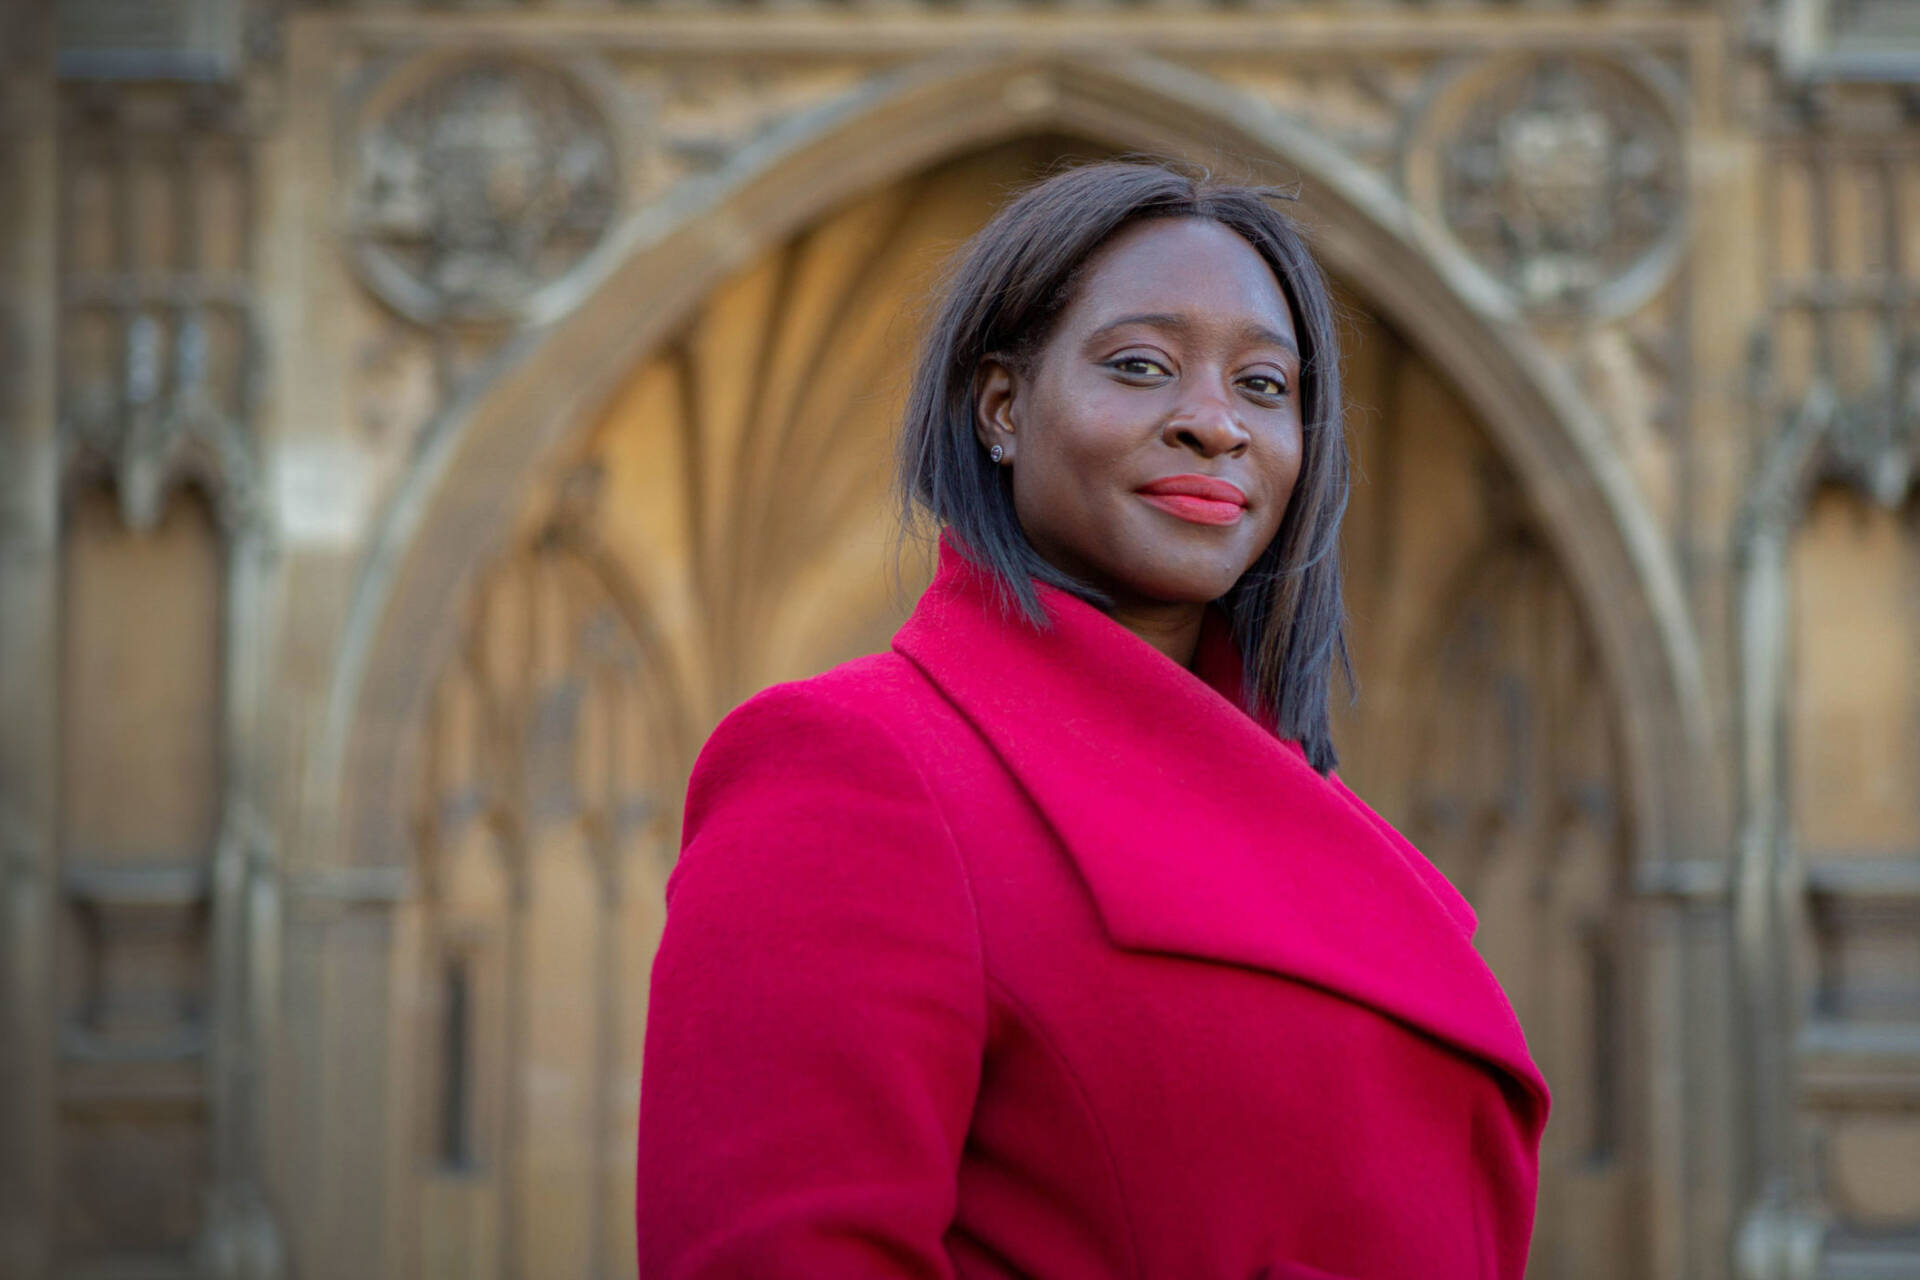 Abena Oppong-Asare, MP for Erith and Thamesmead